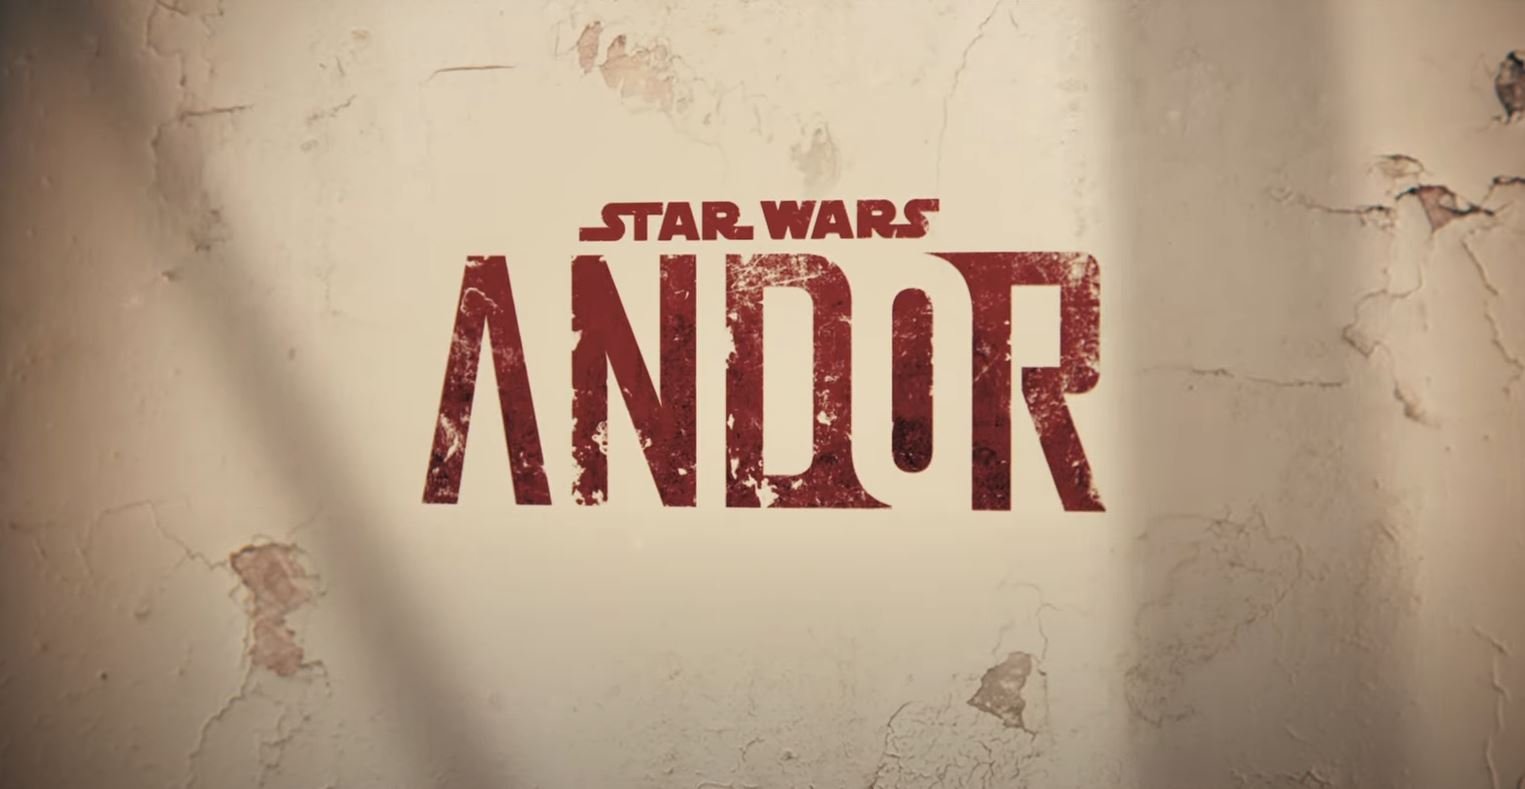 Star Wars: Andor's Biggest Threat Could Be Too Many Cameos